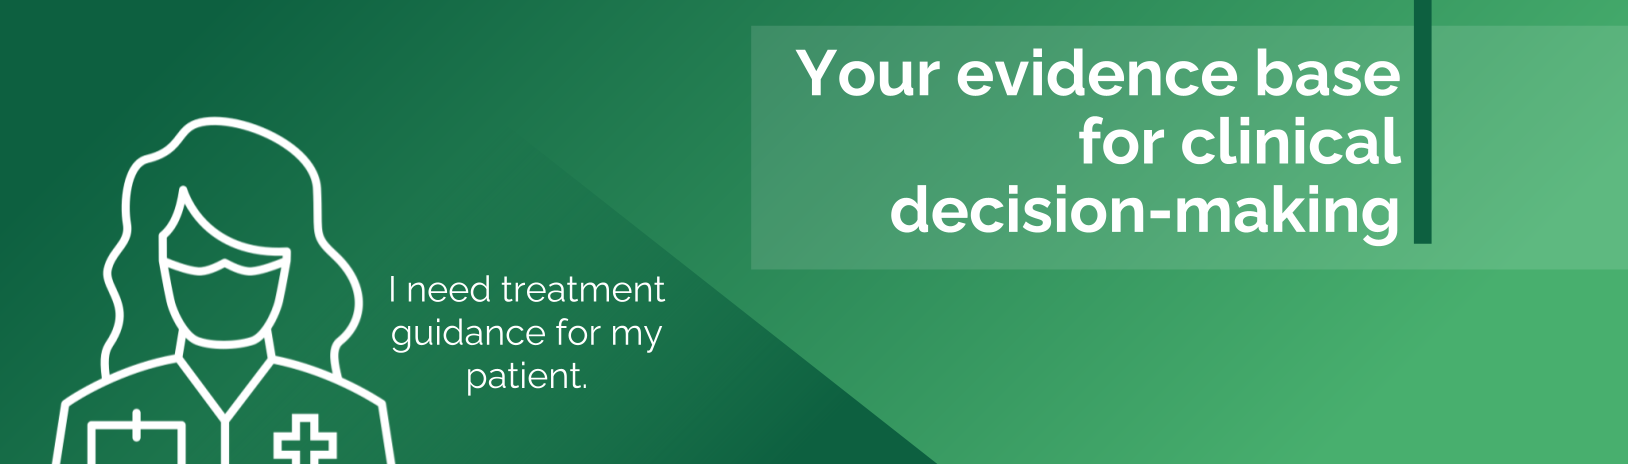 EPOCH is your evidence base for clinical decision-making